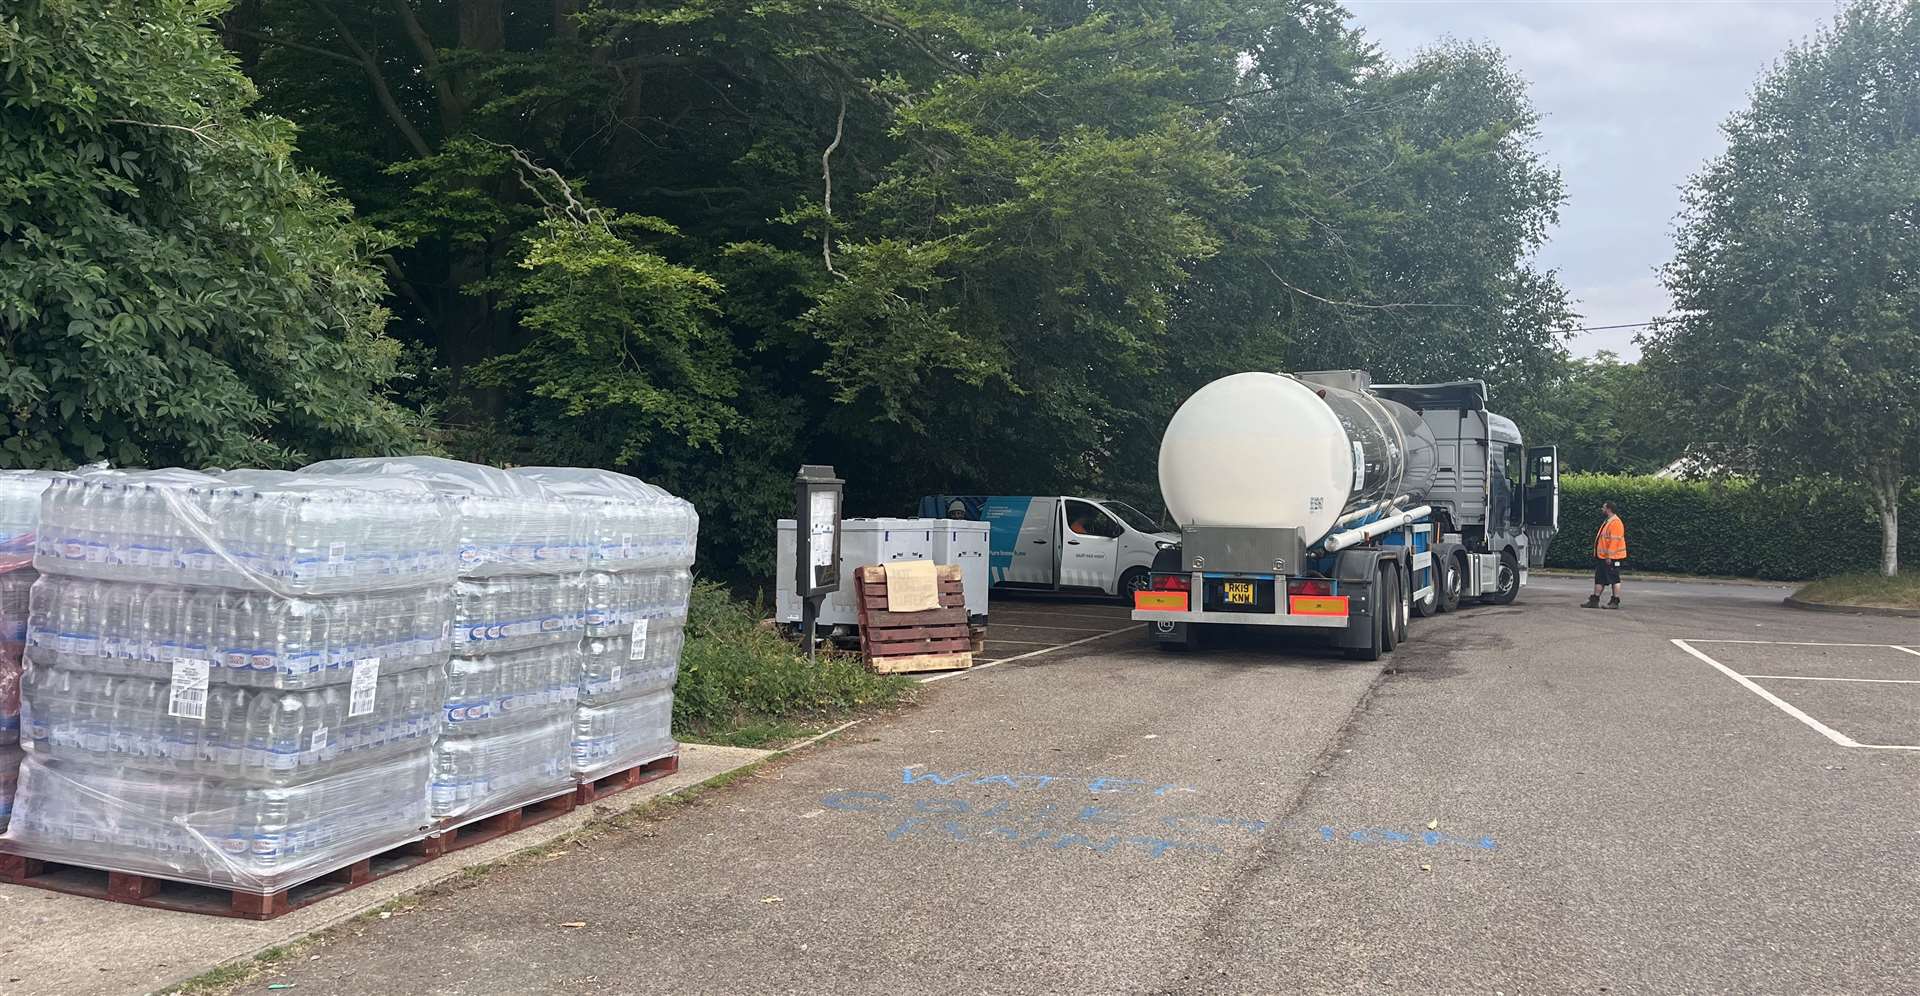 Residents in Challock have gone without reliable water for six days